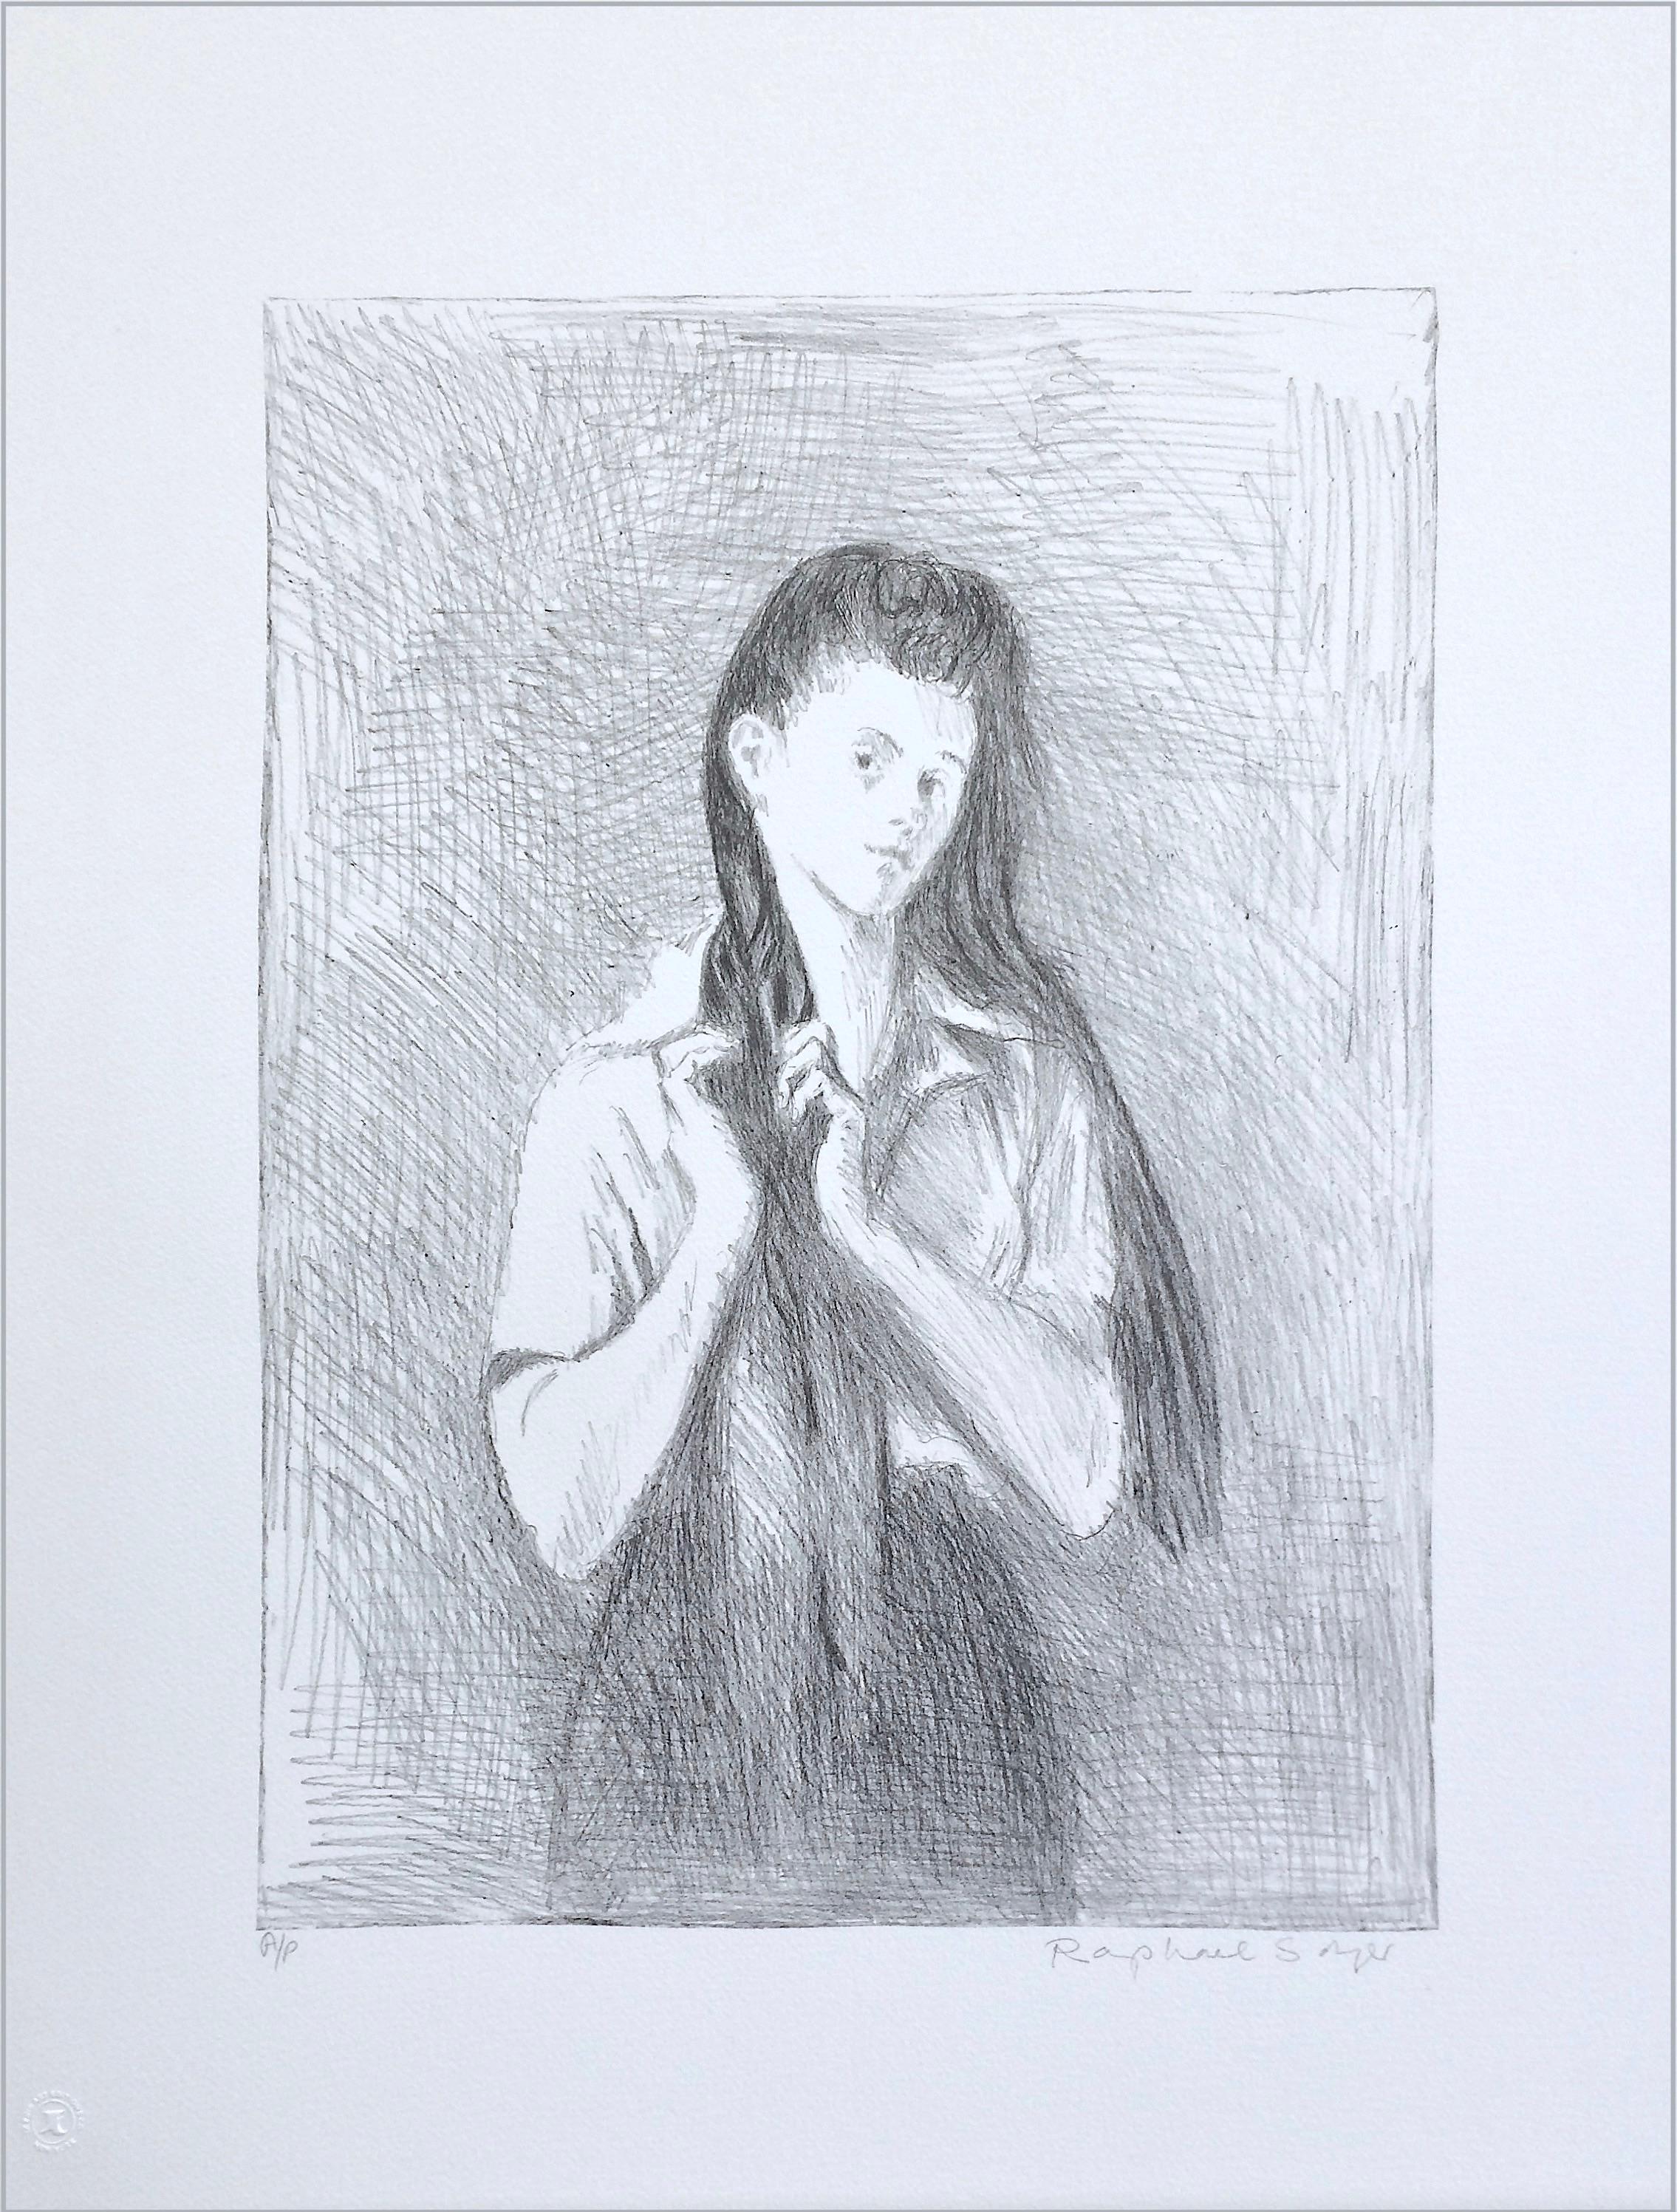 YOUNG WOMAN WITH LONG HAIR Signed Lithograph, Realist Portrait Drawing - Gray Interior Print by Raphael Soyer